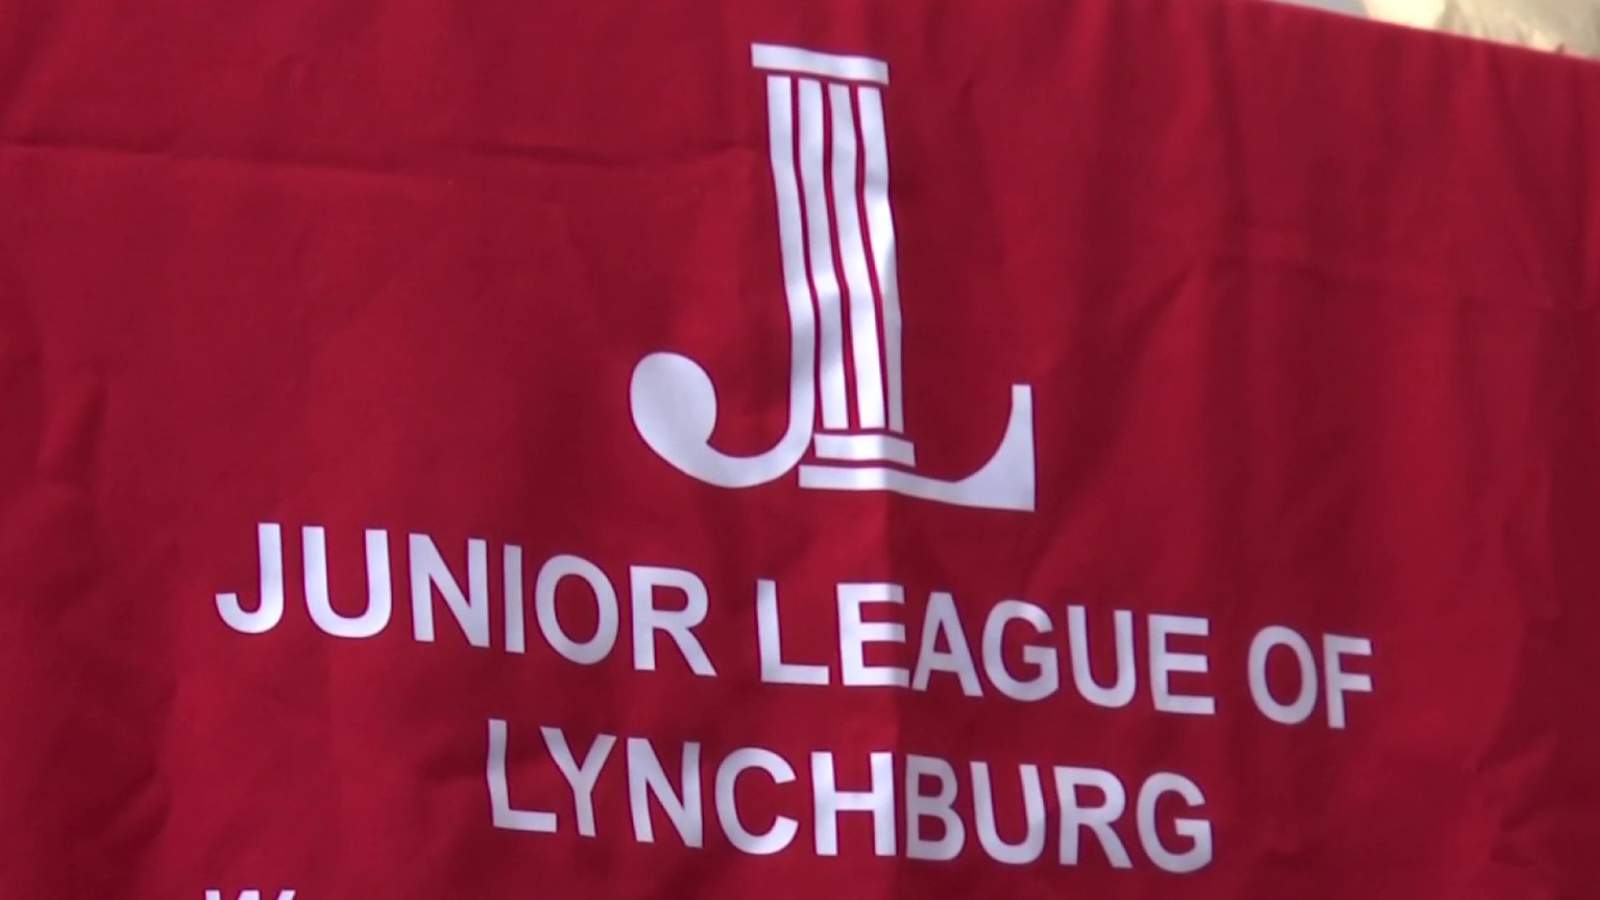 Junior League of Lynchburg launches P.A.D. Center to distribute hygiene products to those in need